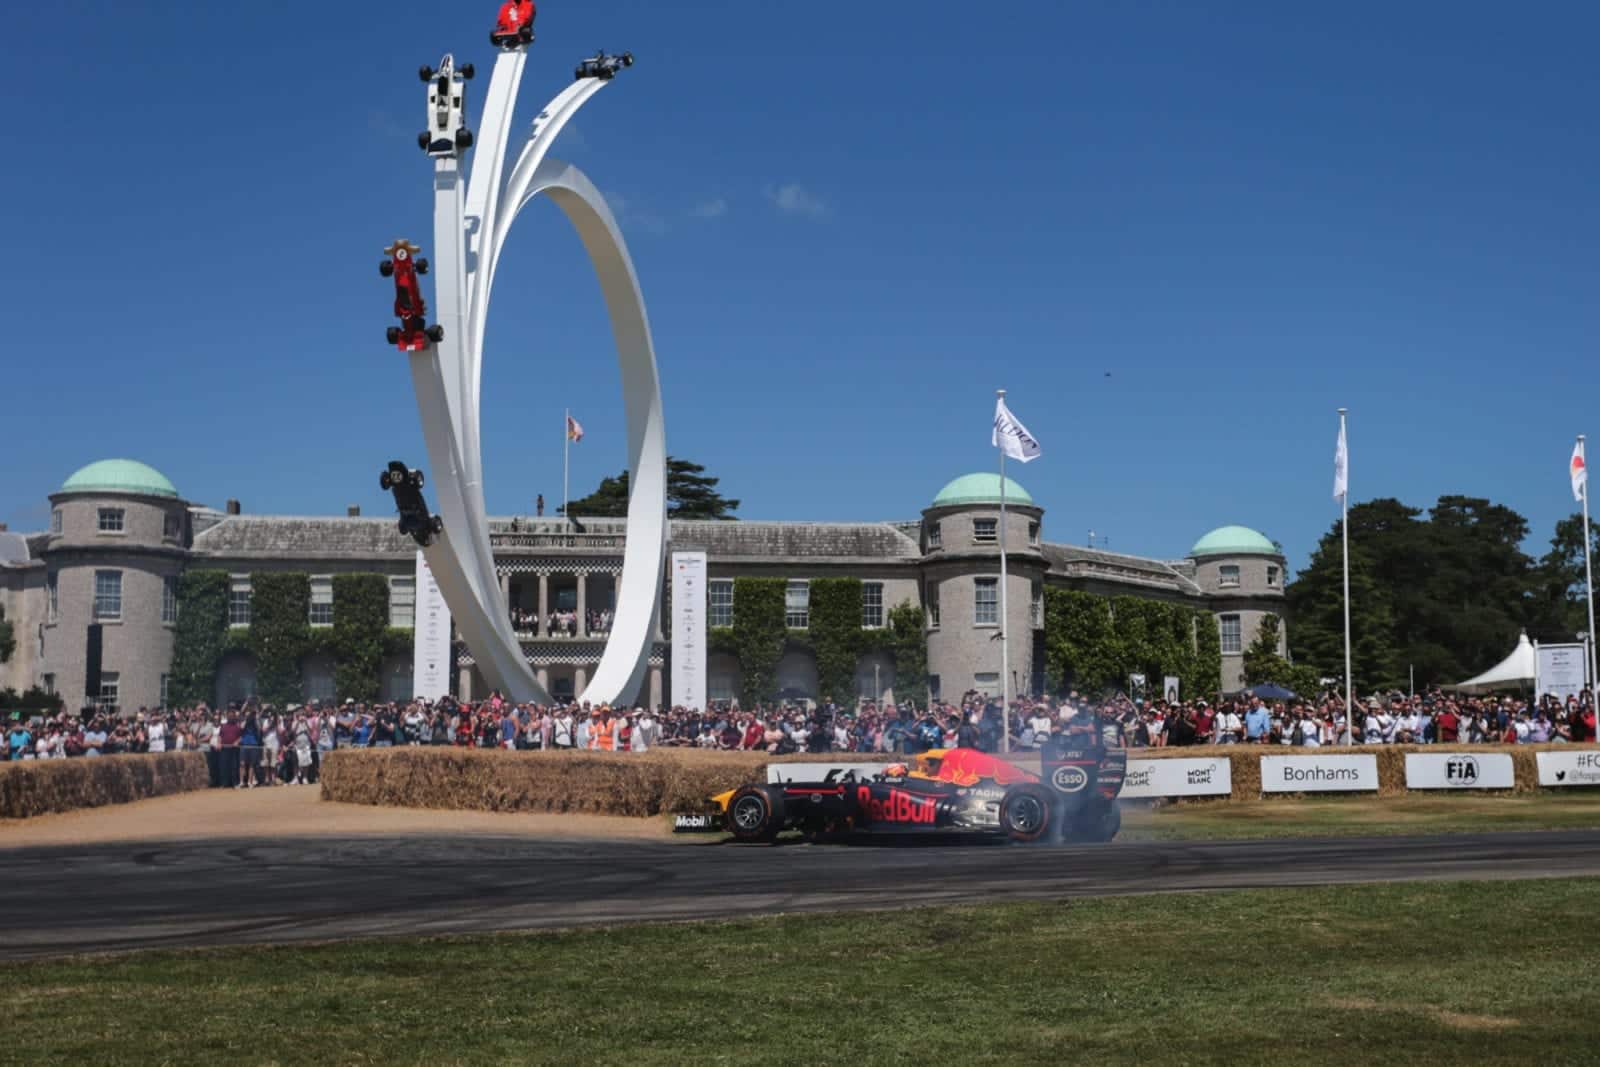 Red Bull at the Goodwood Festival of Speed